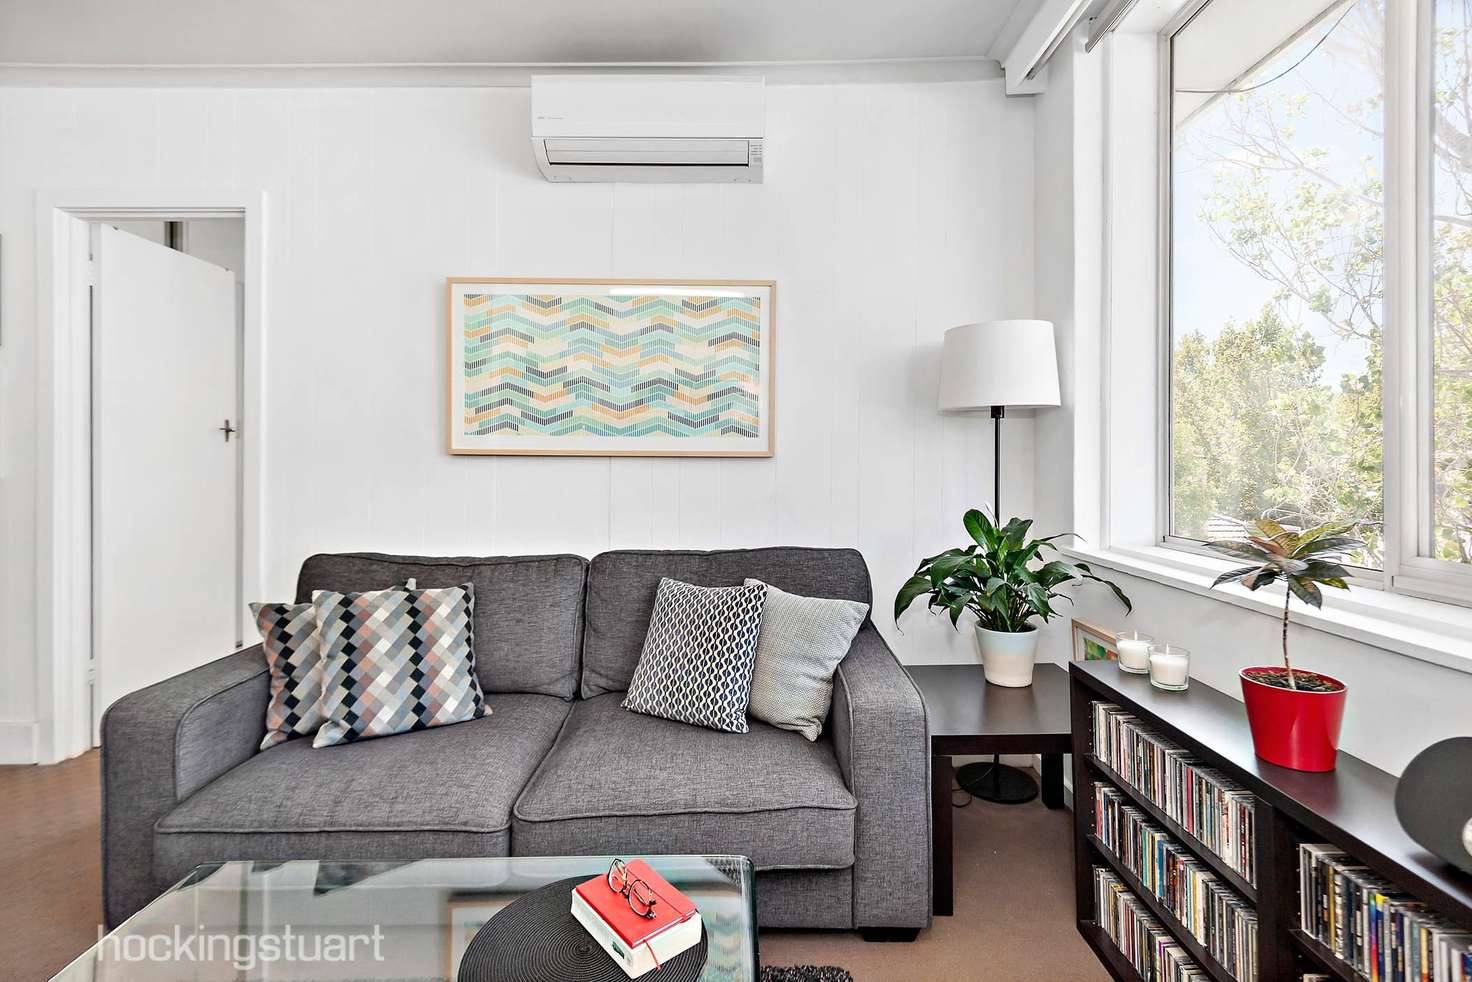 Main view of Homely apartment listing, 11/52 Alma Road, St Kilda VIC 3182